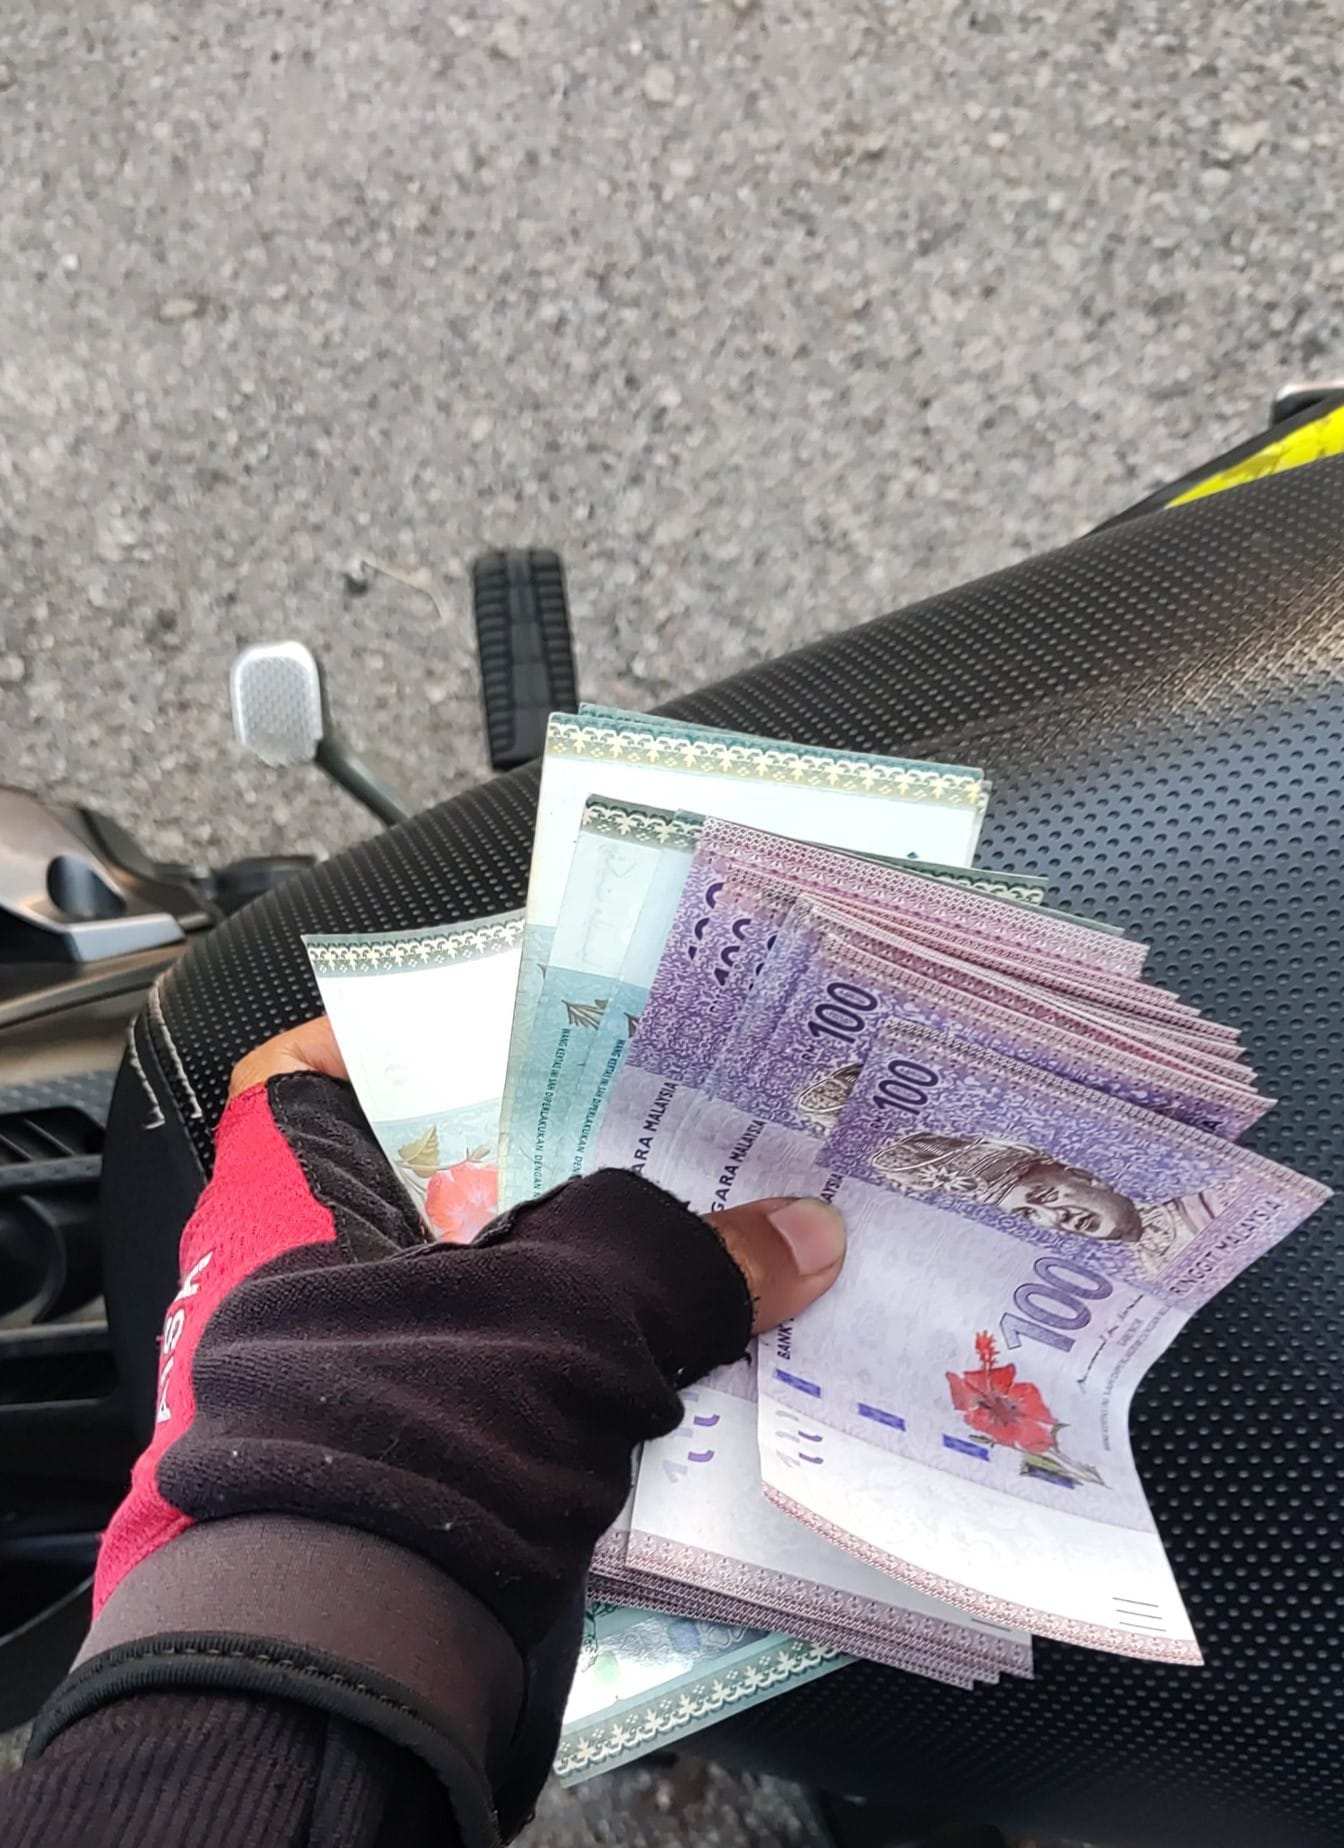 A food delivery rider was scammed after receiving fake RM100 bank notes. Image credit: Asyraff Akra